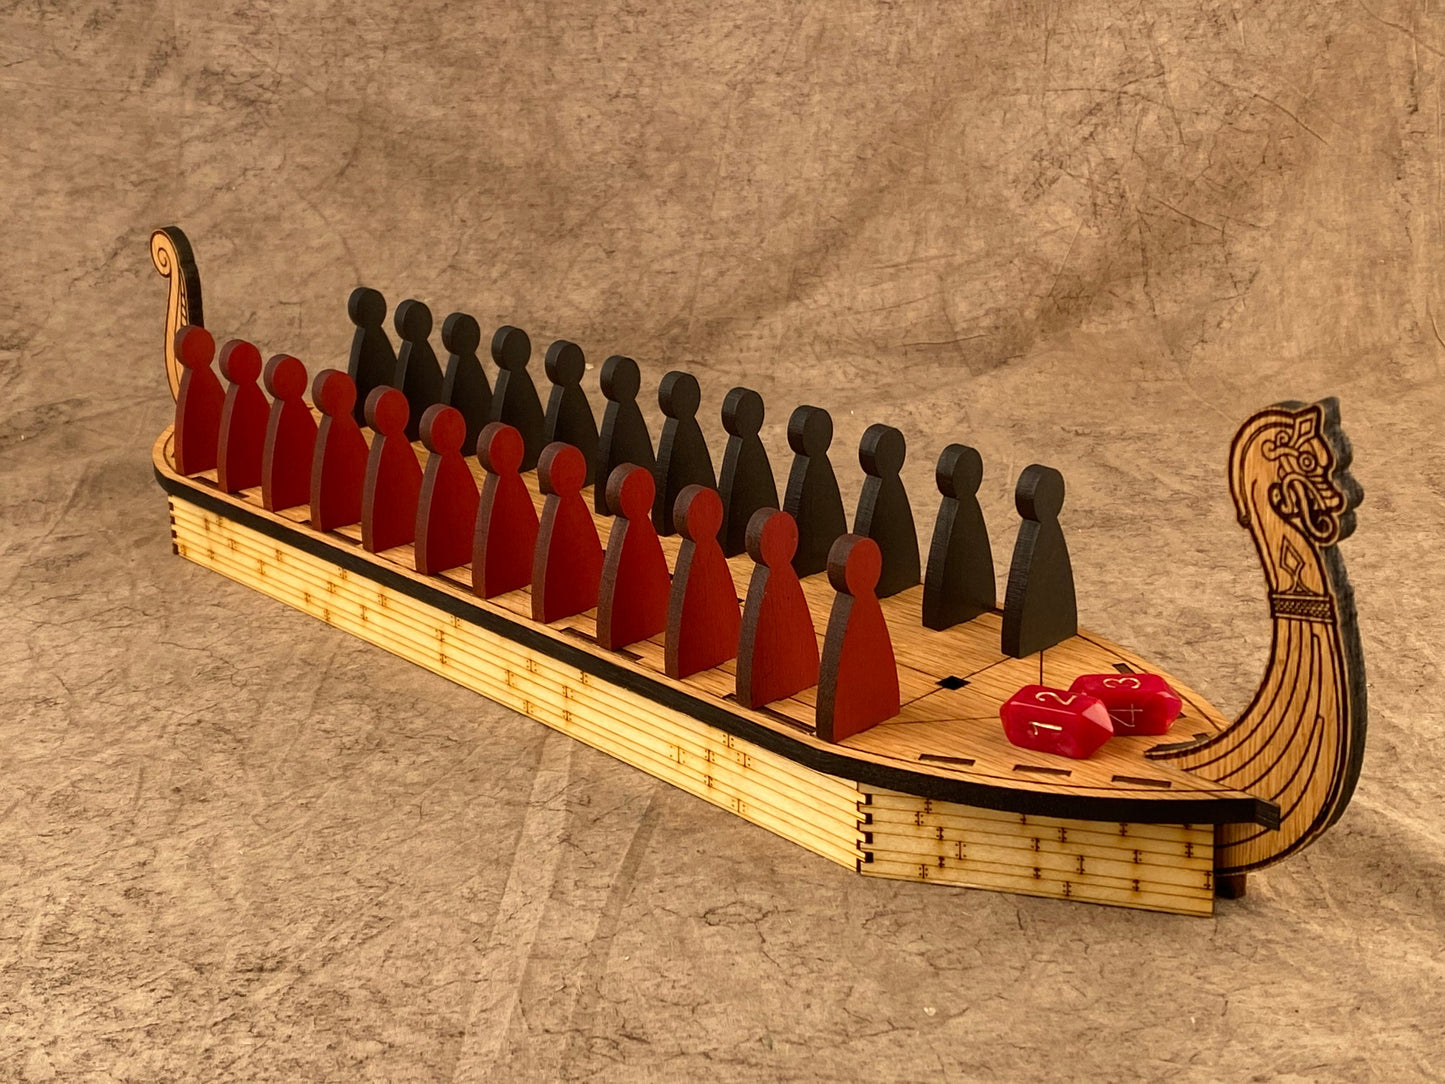 DALDOS! The Viking Game of Ship Board BATTLE! Scandinavian Design, an Ancient Game from the Dawn of the Vikings.